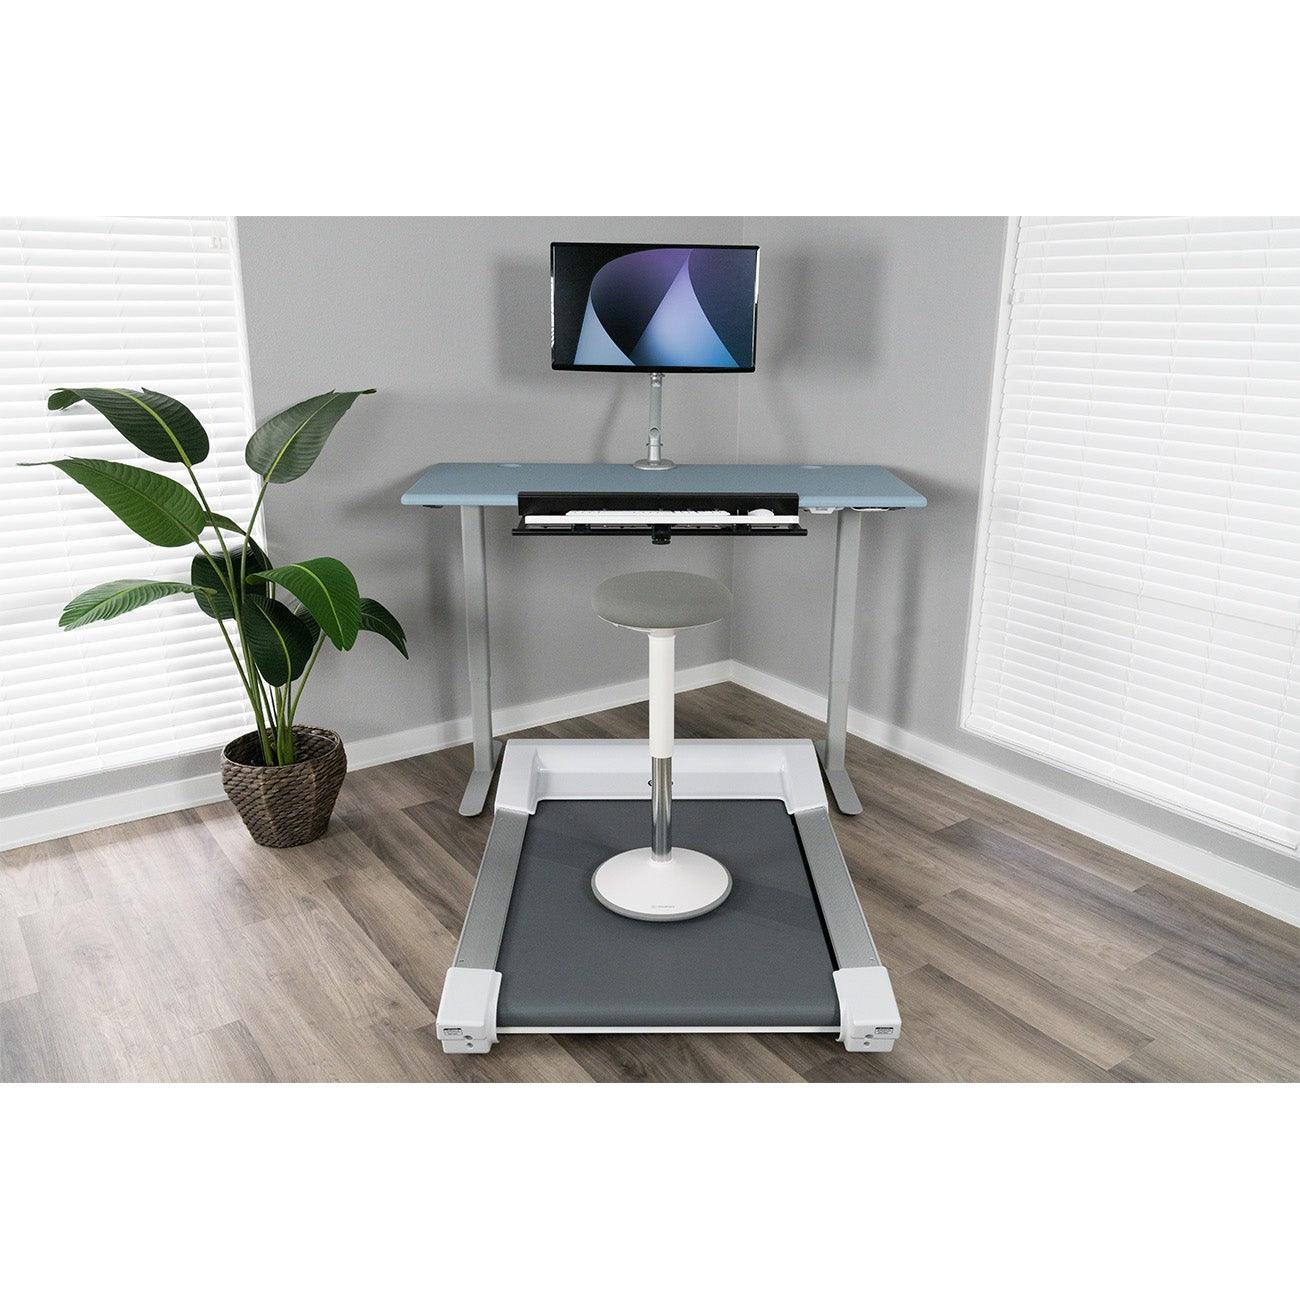 imovr Unsit treadmill desk workstation with Jaxson standing desk, SteadyType Exo keyboard tray and Energy Treadtop Stool